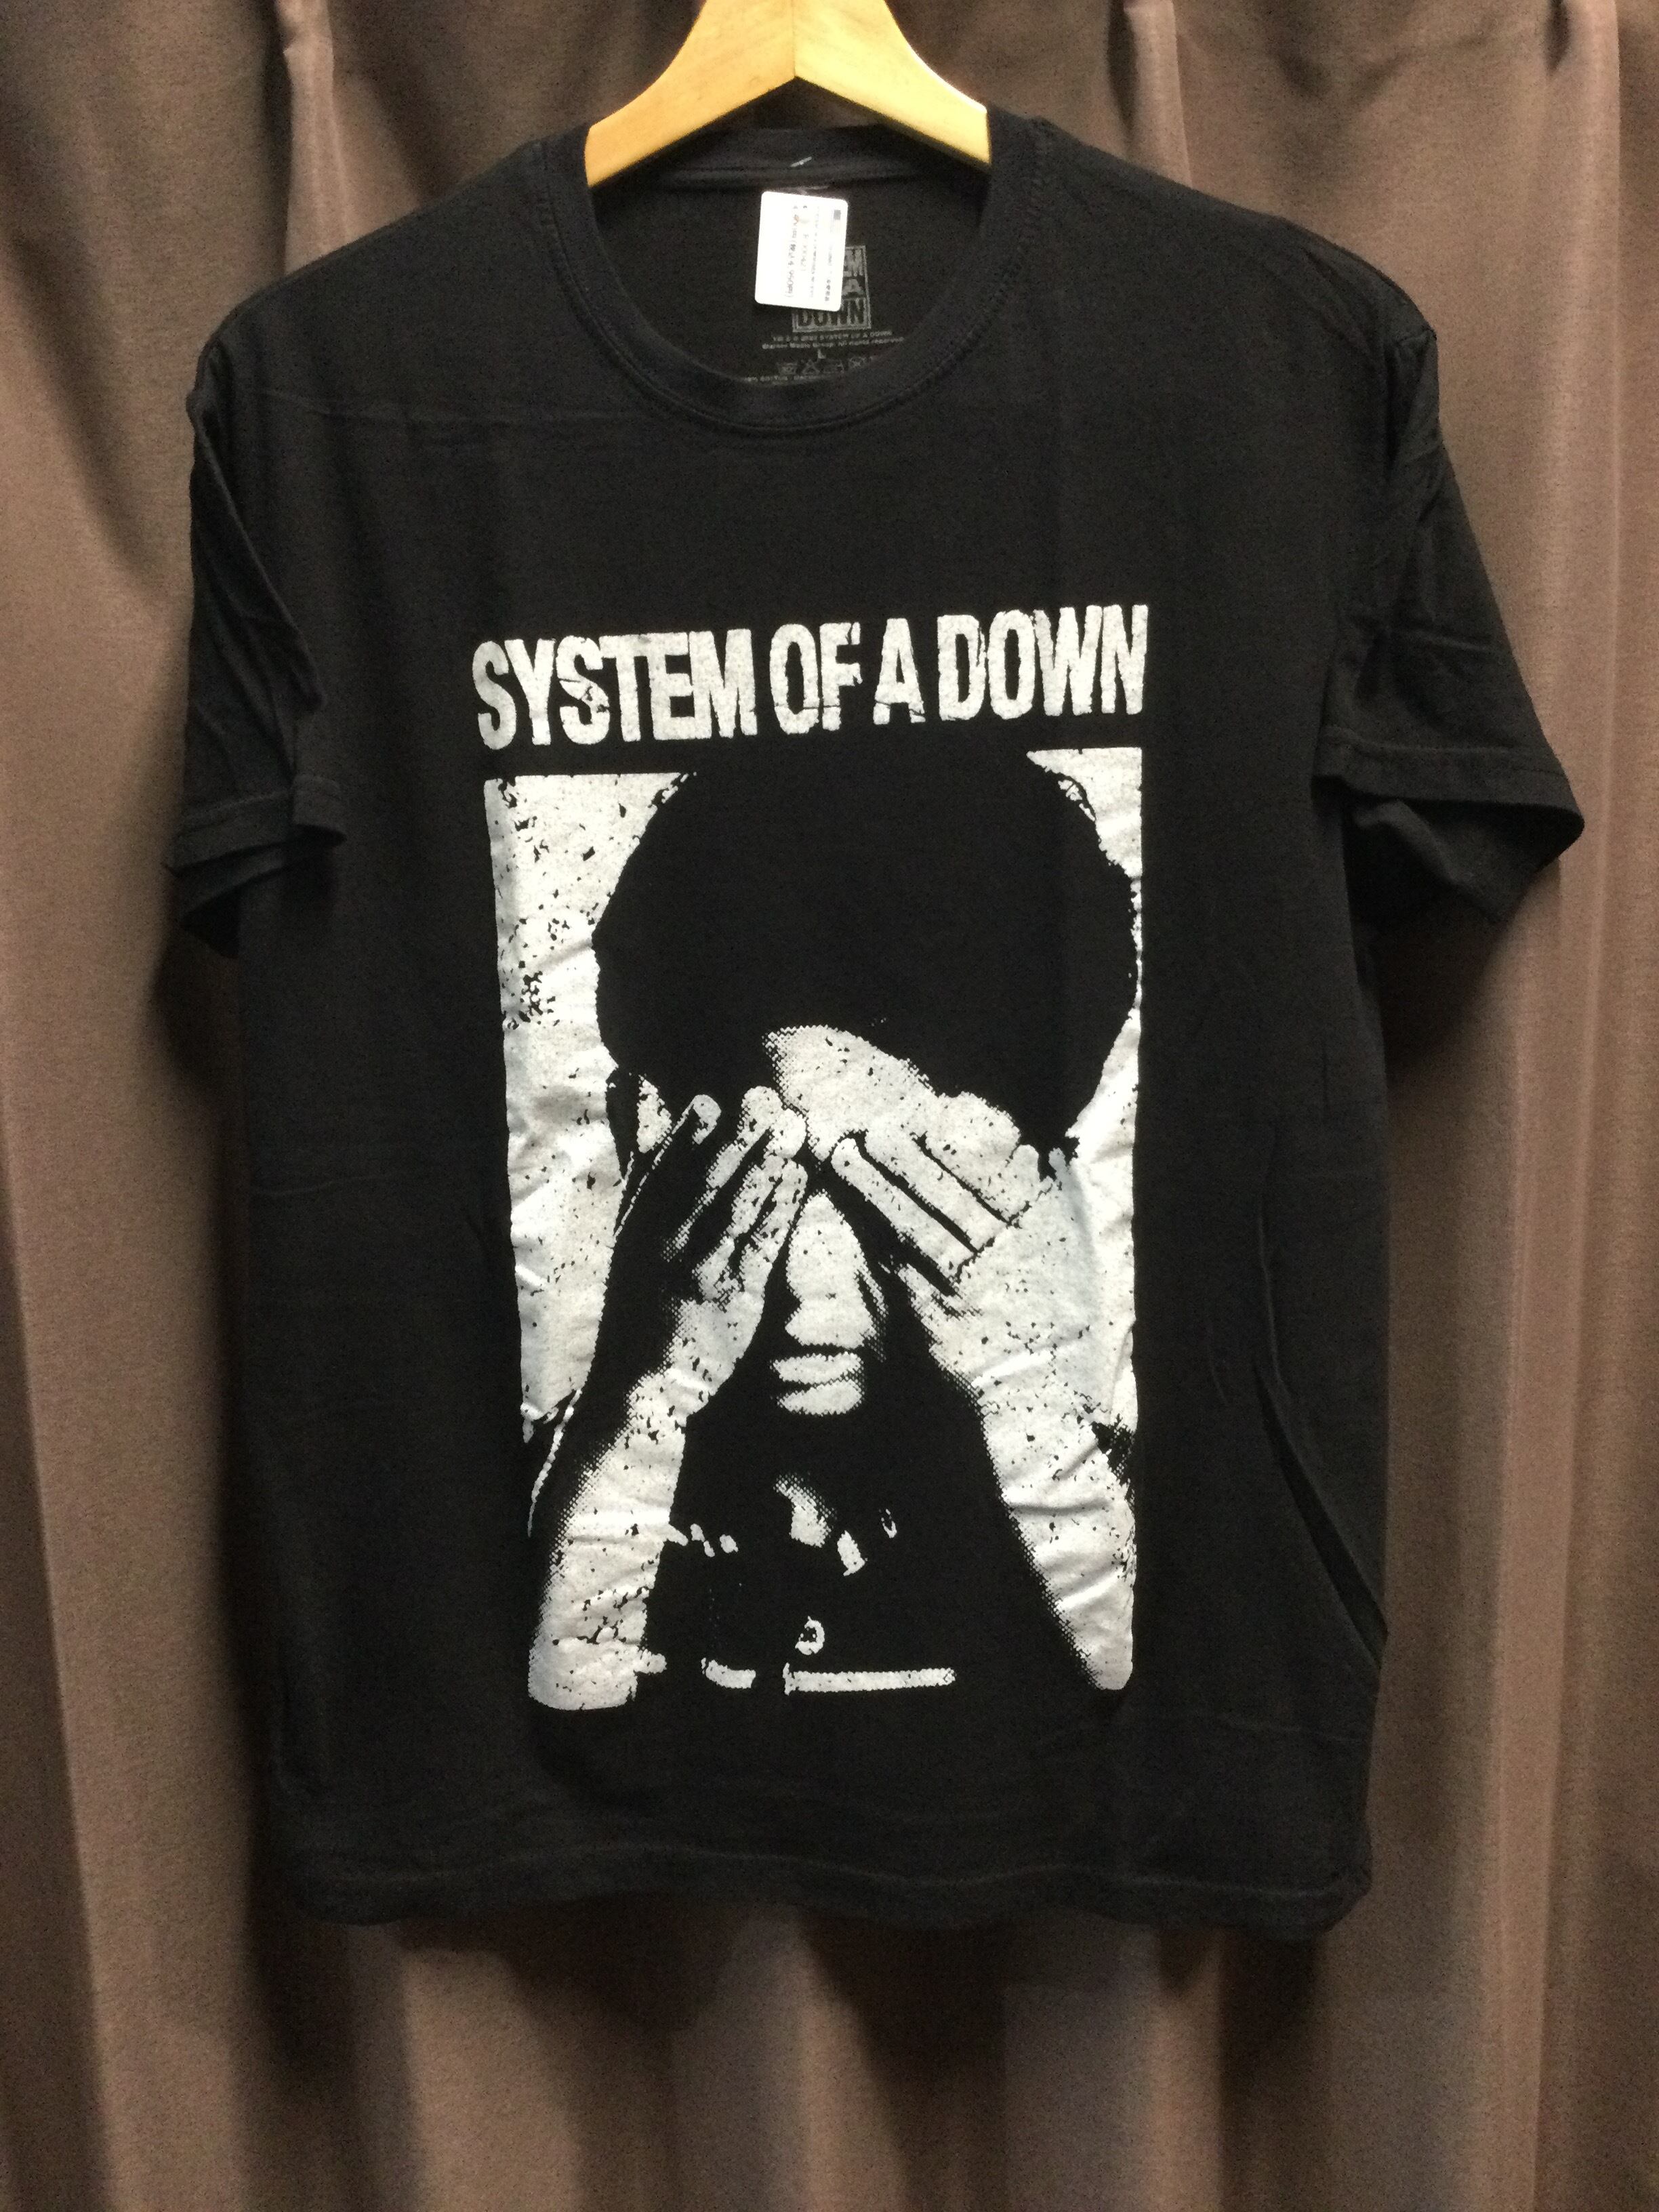 L RO00423 正規品 SYSTEM OF A DOWN システム・オブ・ア・ダウン「SEE ...